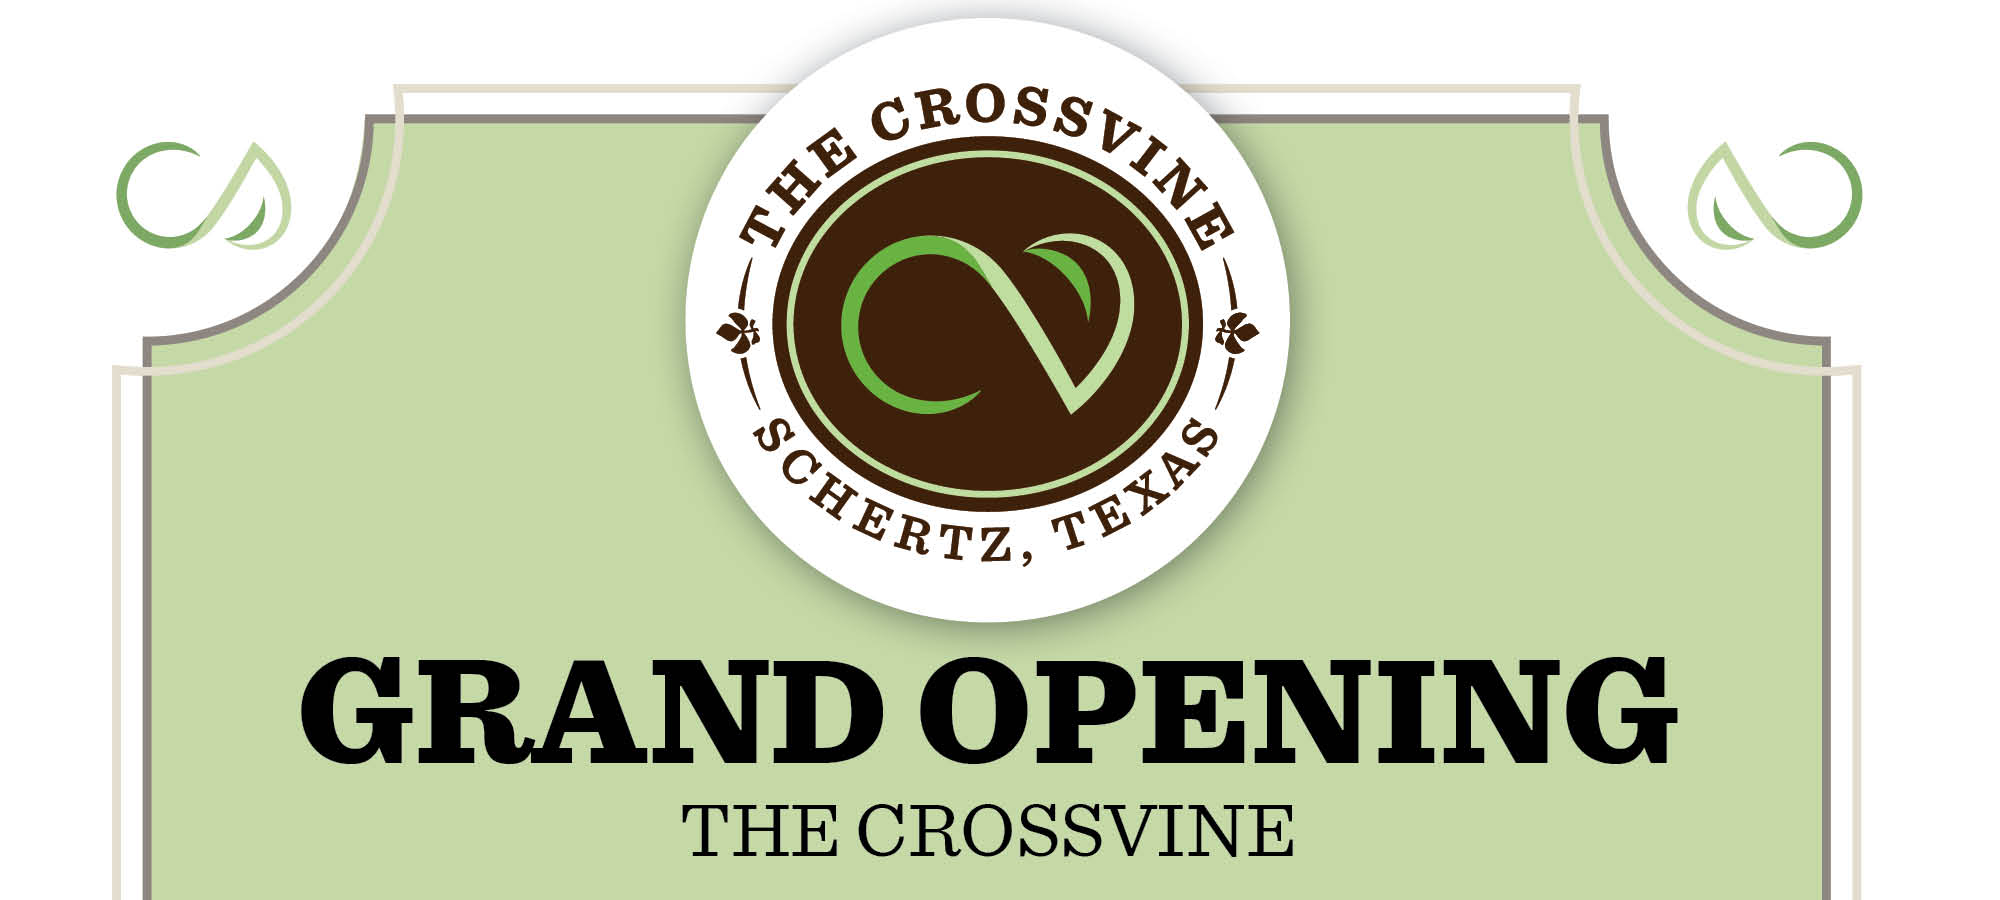 Explore Model Homes, Enjoy Light Bites and Enter Giveaway in The Crossvine